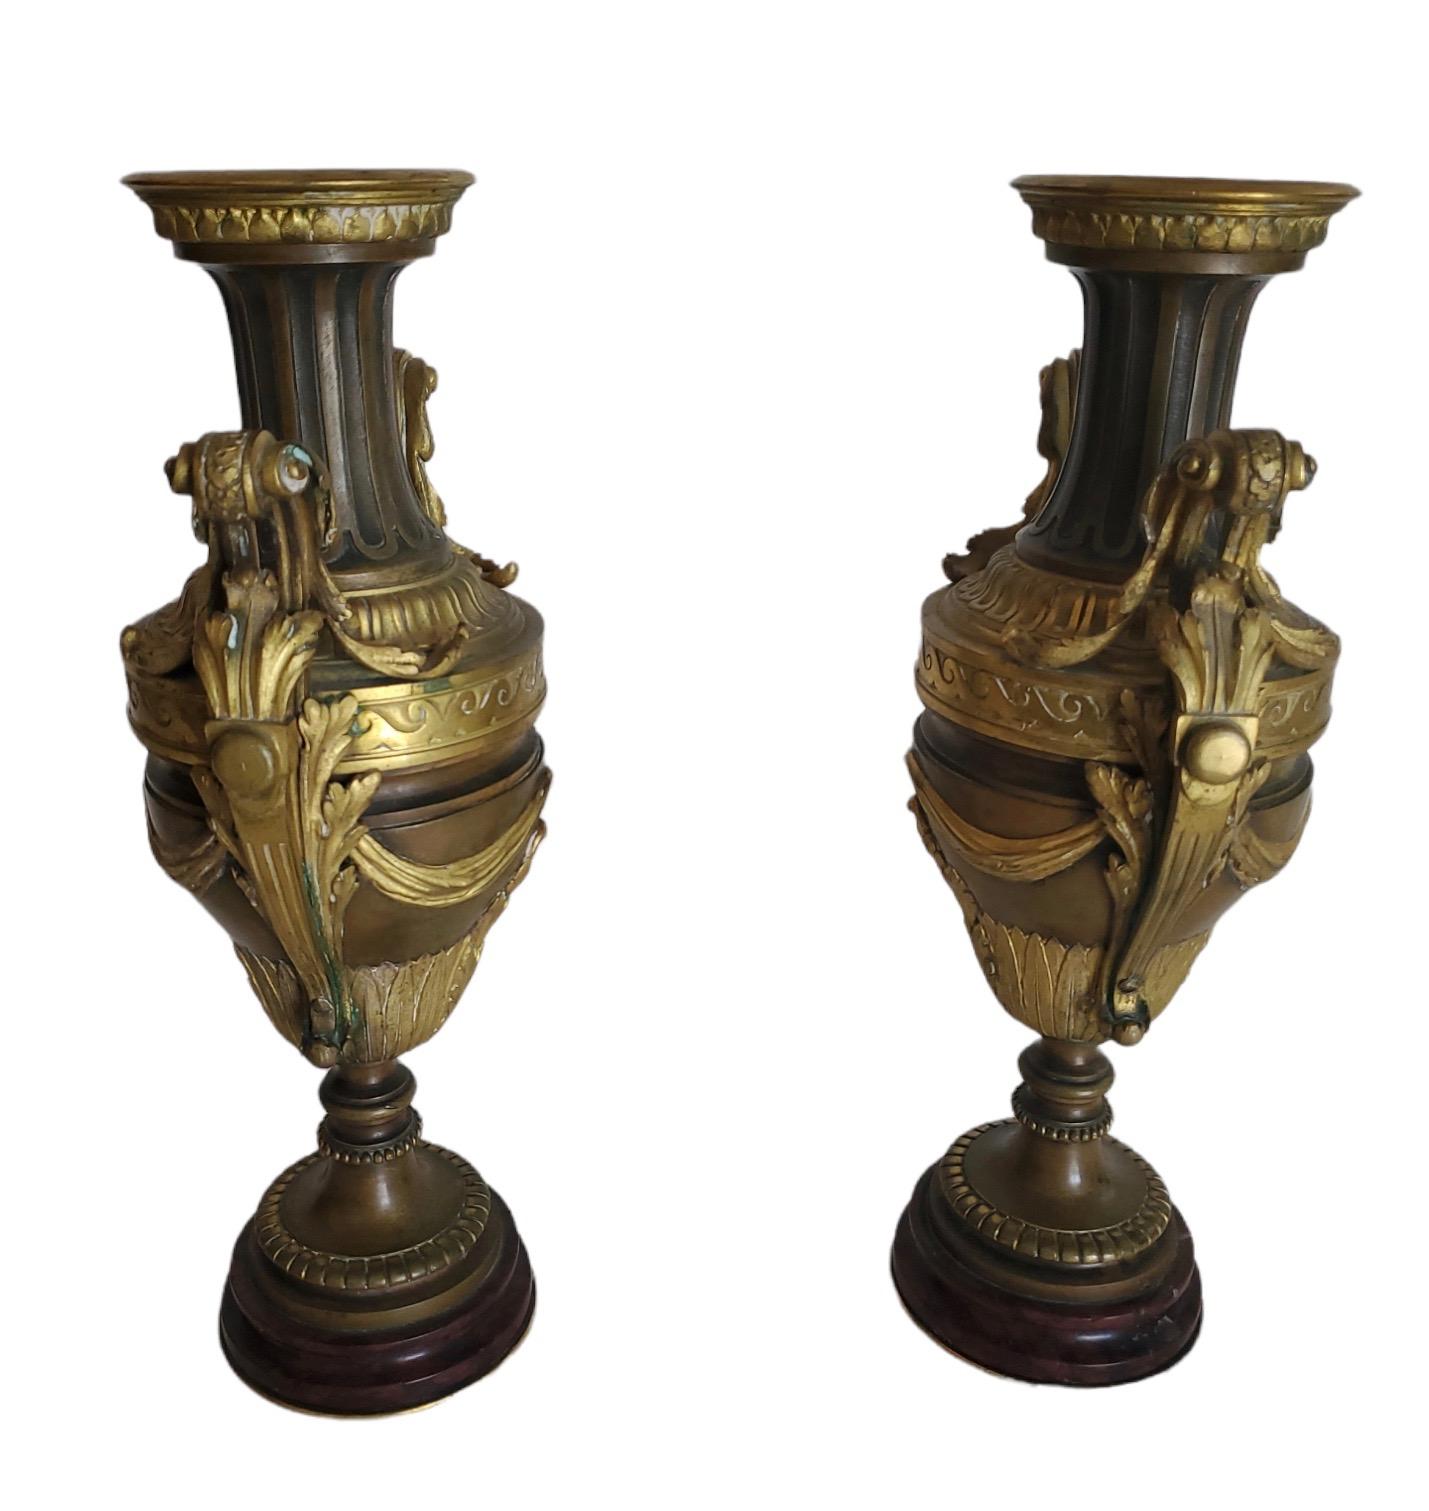 Pair of handled finely chased and cast bronze and dore bronze urns/garniture.